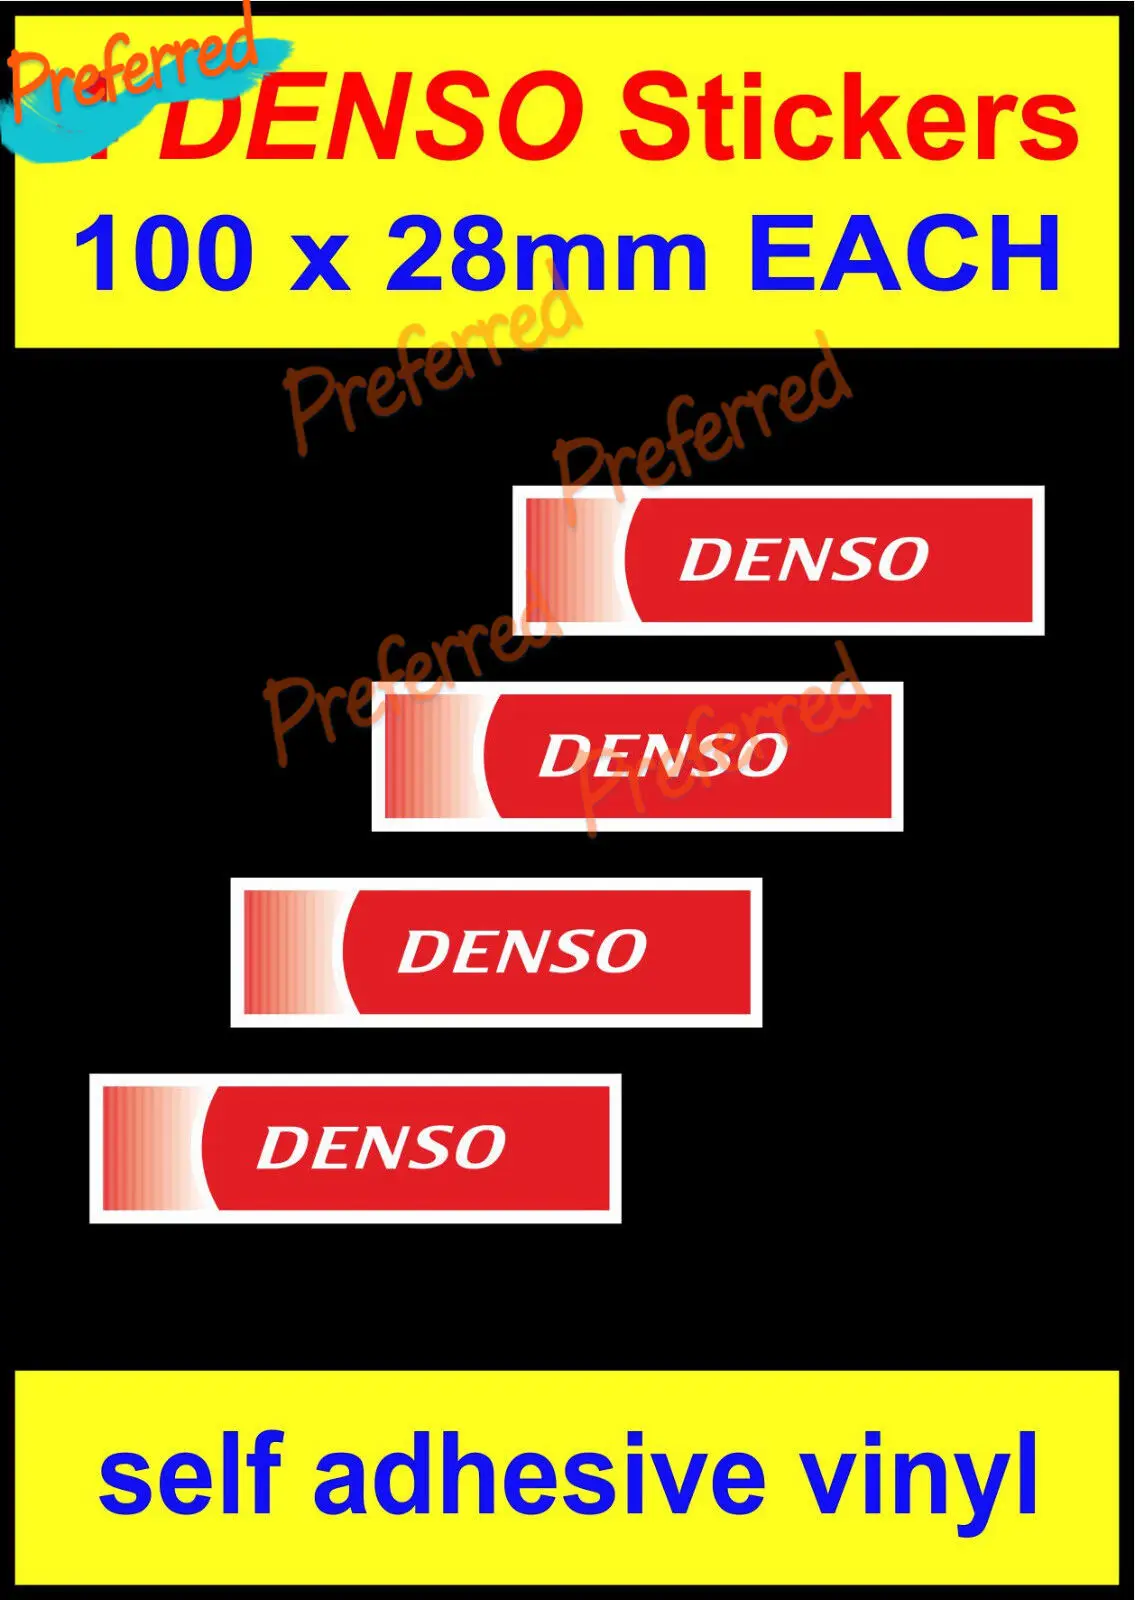 

4X Denso Motorcycle Racing Retro Decal Sticker Laminated for Your Home Car Coolers Laptops Racing Helmet Trunk Wall Sticker